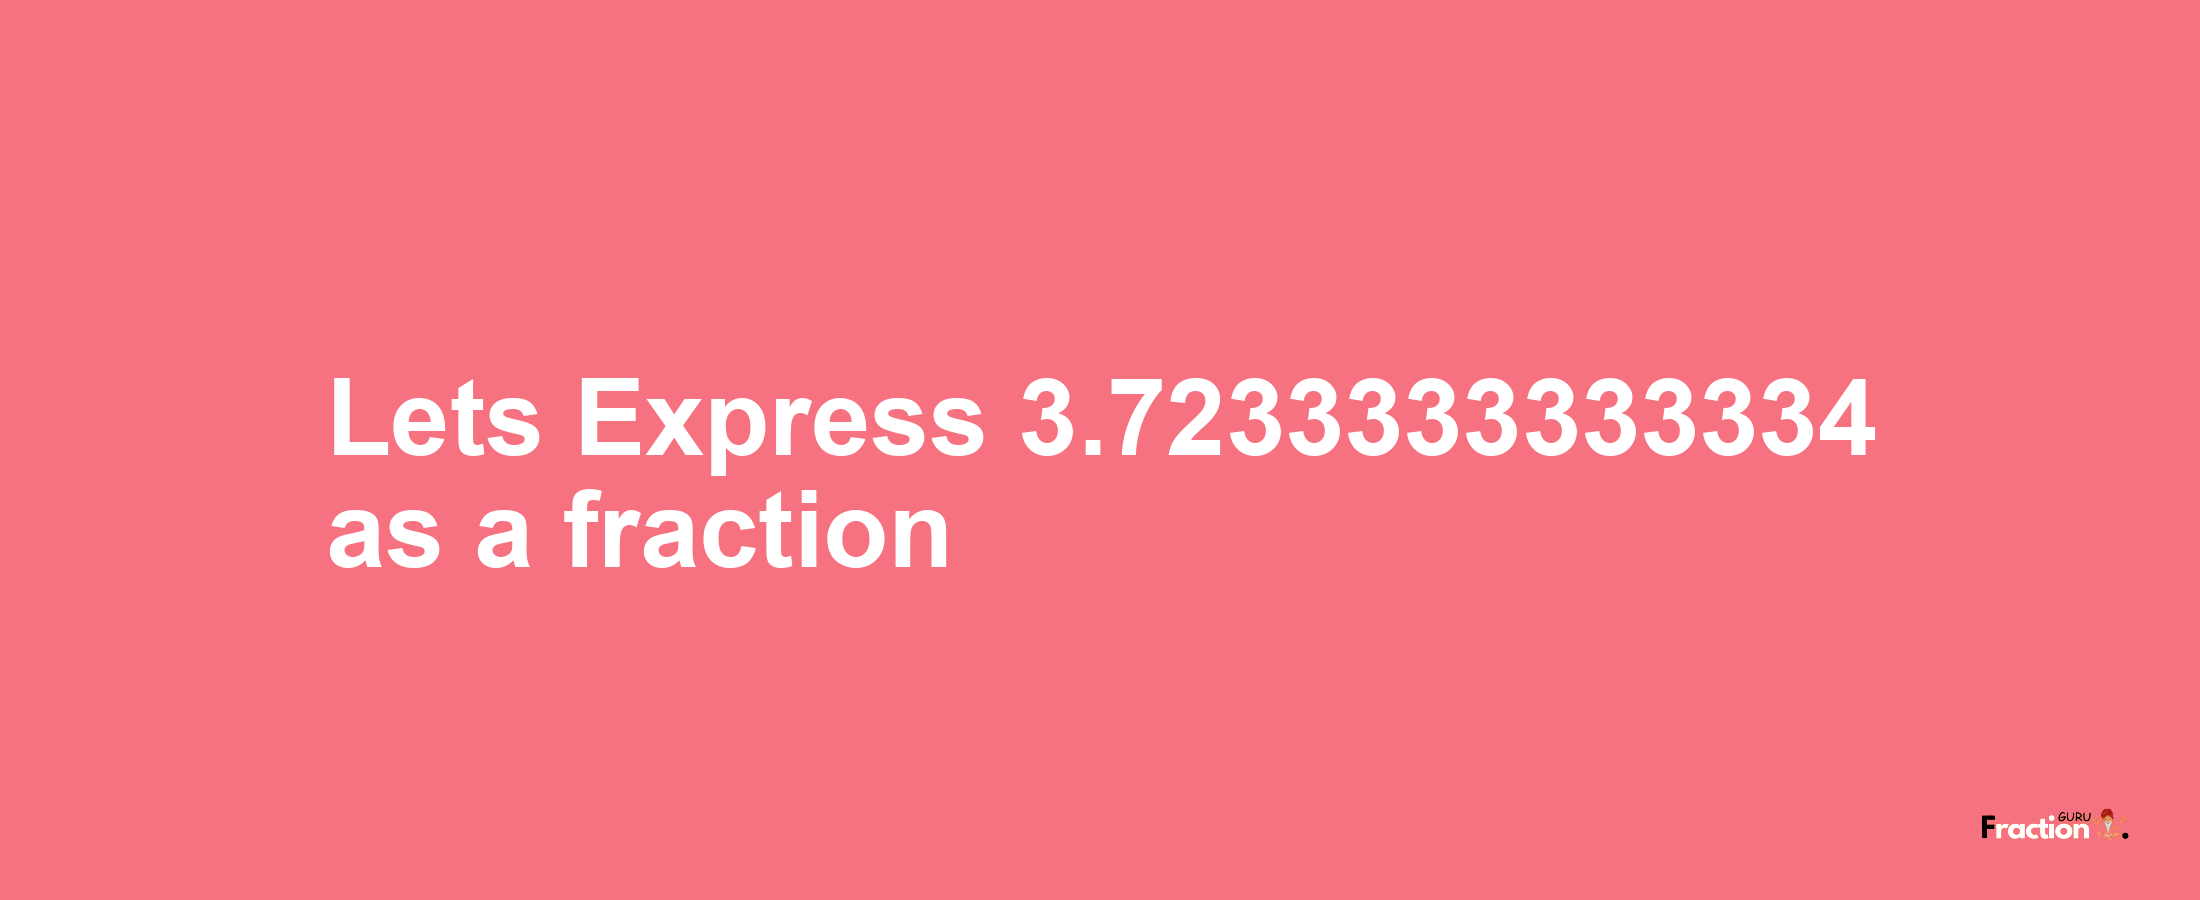 Lets Express 3.7233333333334 as afraction